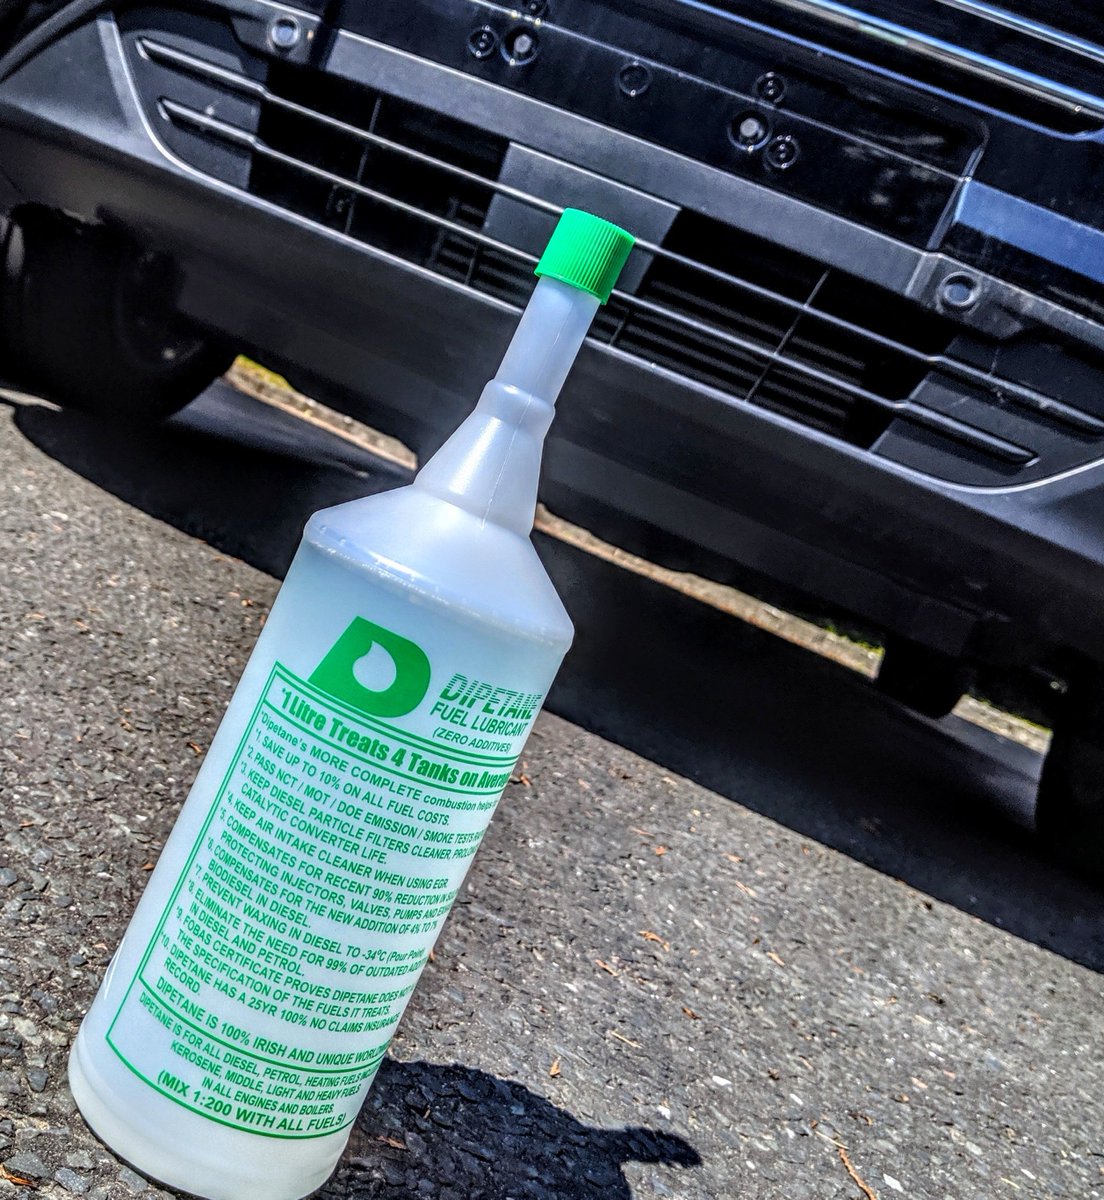 Not discovered the benefits yet? We are selling a litre bottle of Dipetane for £10 plus p&p! For more information call 01270 256 670 and speak to our friendly team or drop us a DM and we would be happy to help! #dipetane #taxis